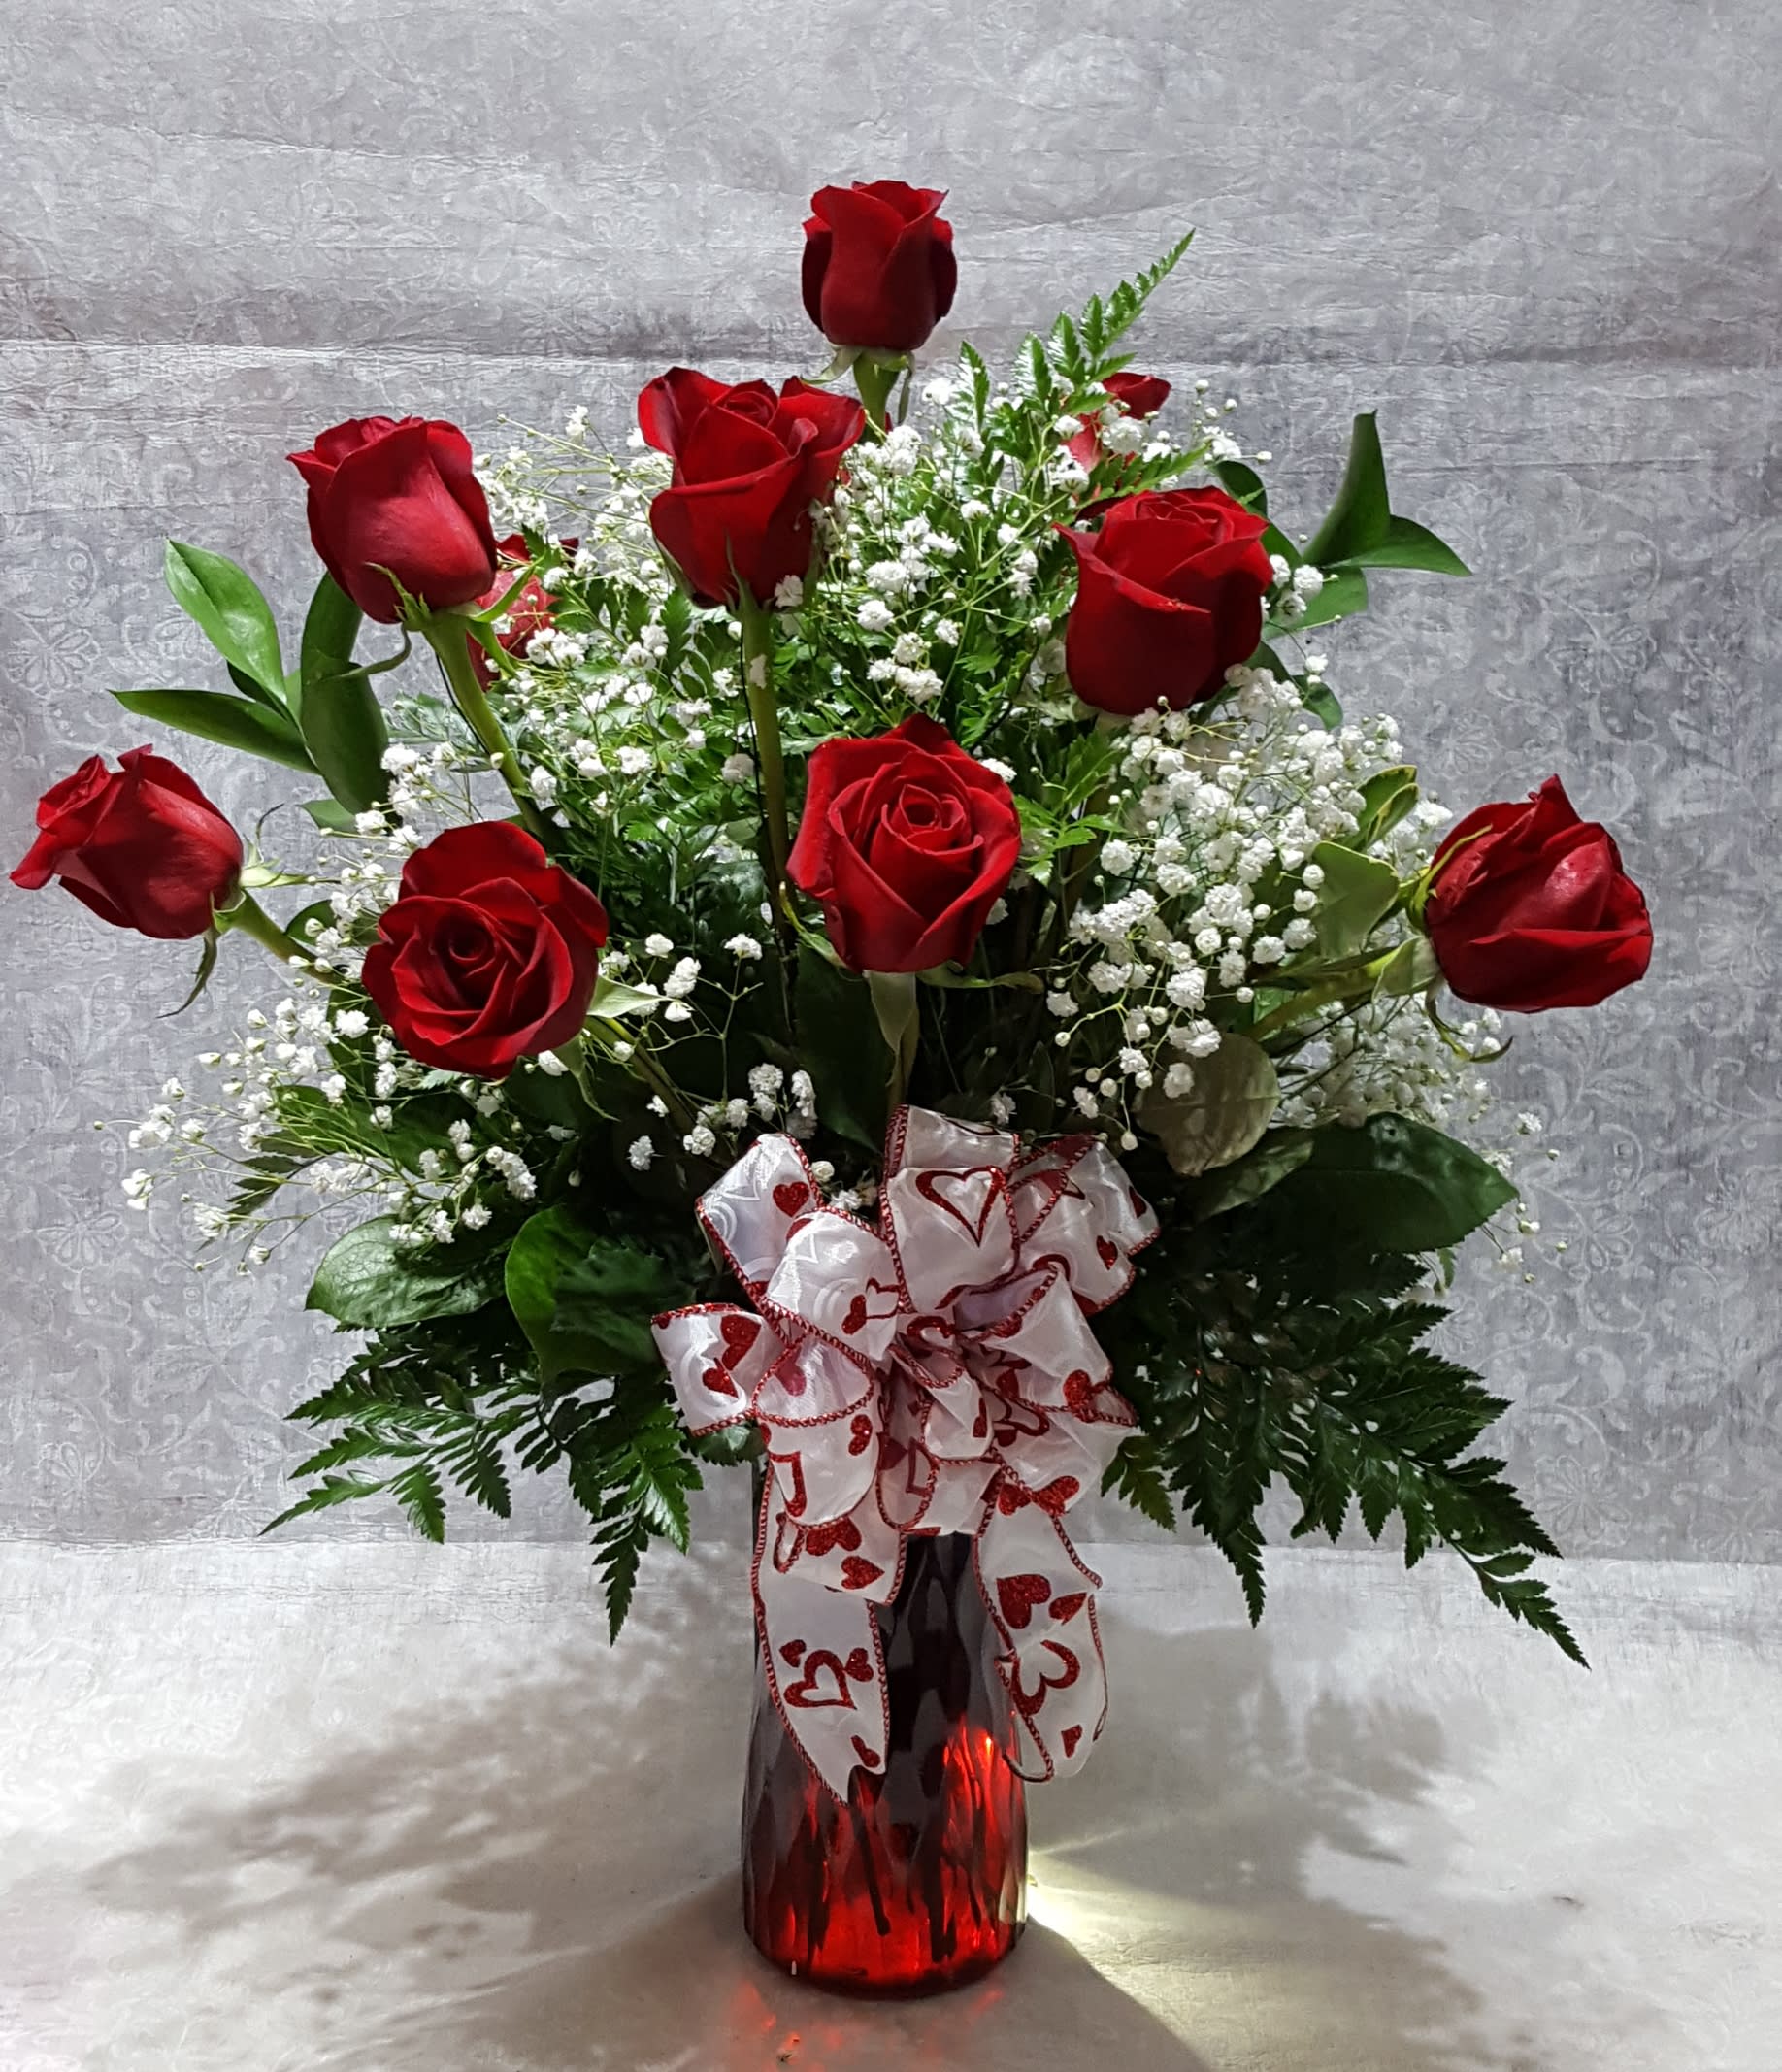 Classic Valentine Dozen Red Rose Vase In Warren Oh Jensens Flowers And Ts Inc